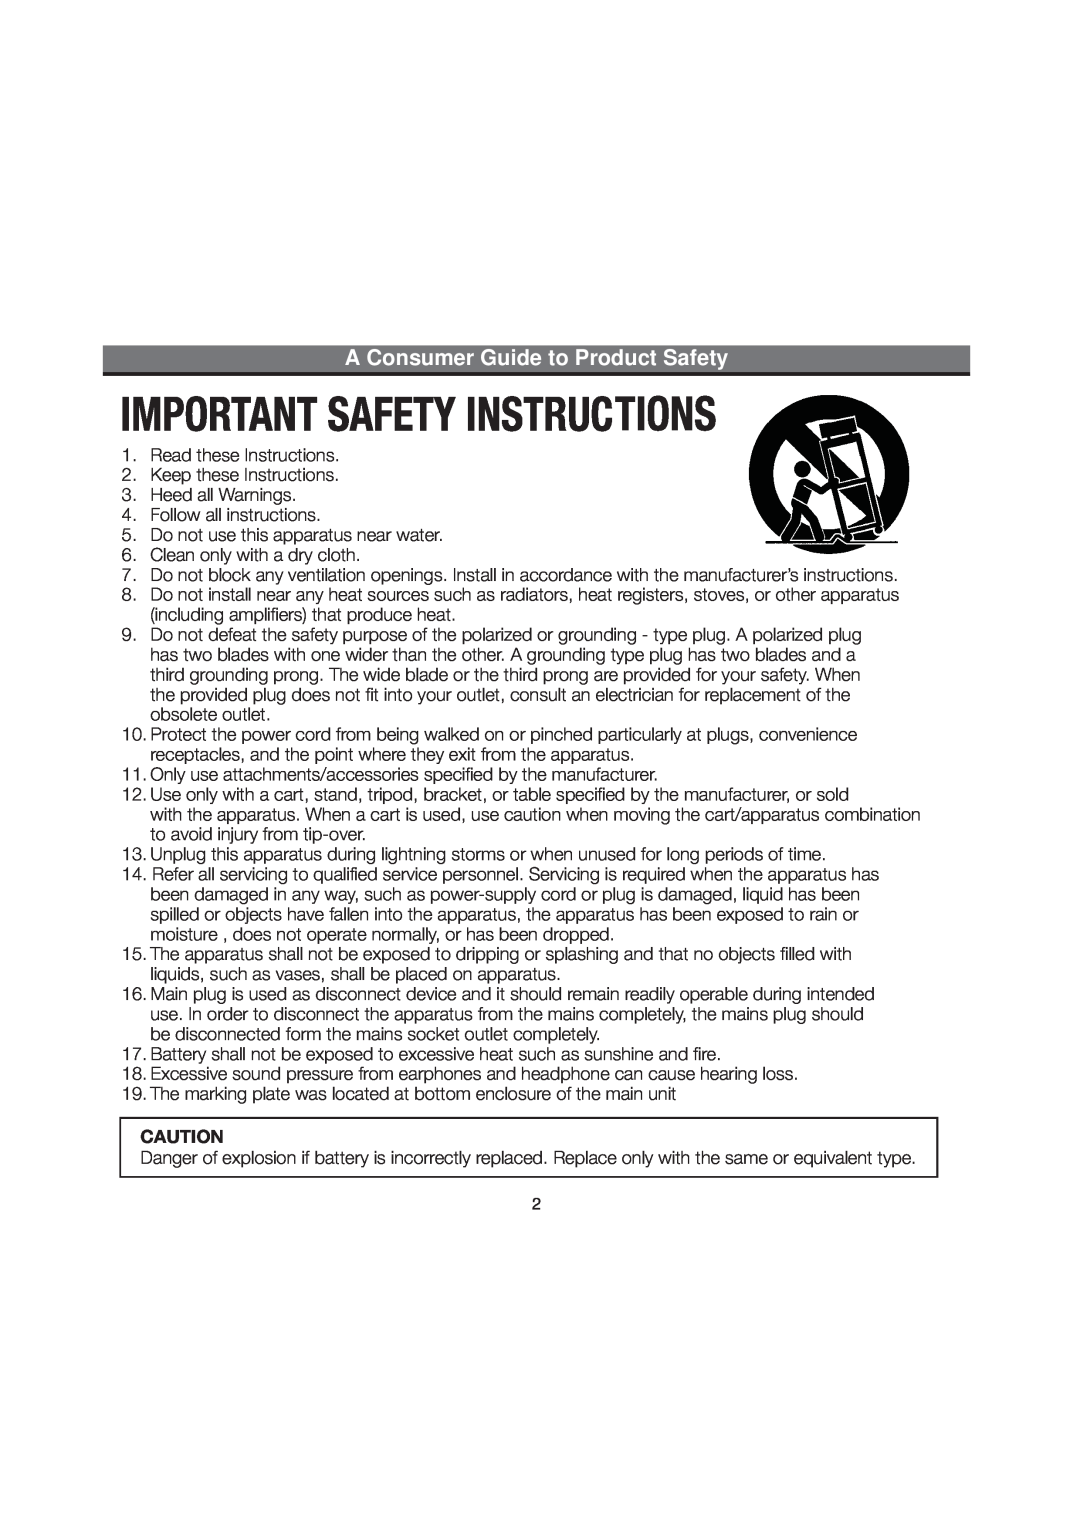 iHome iH51 manual A Consumer Guide to Product Safety 